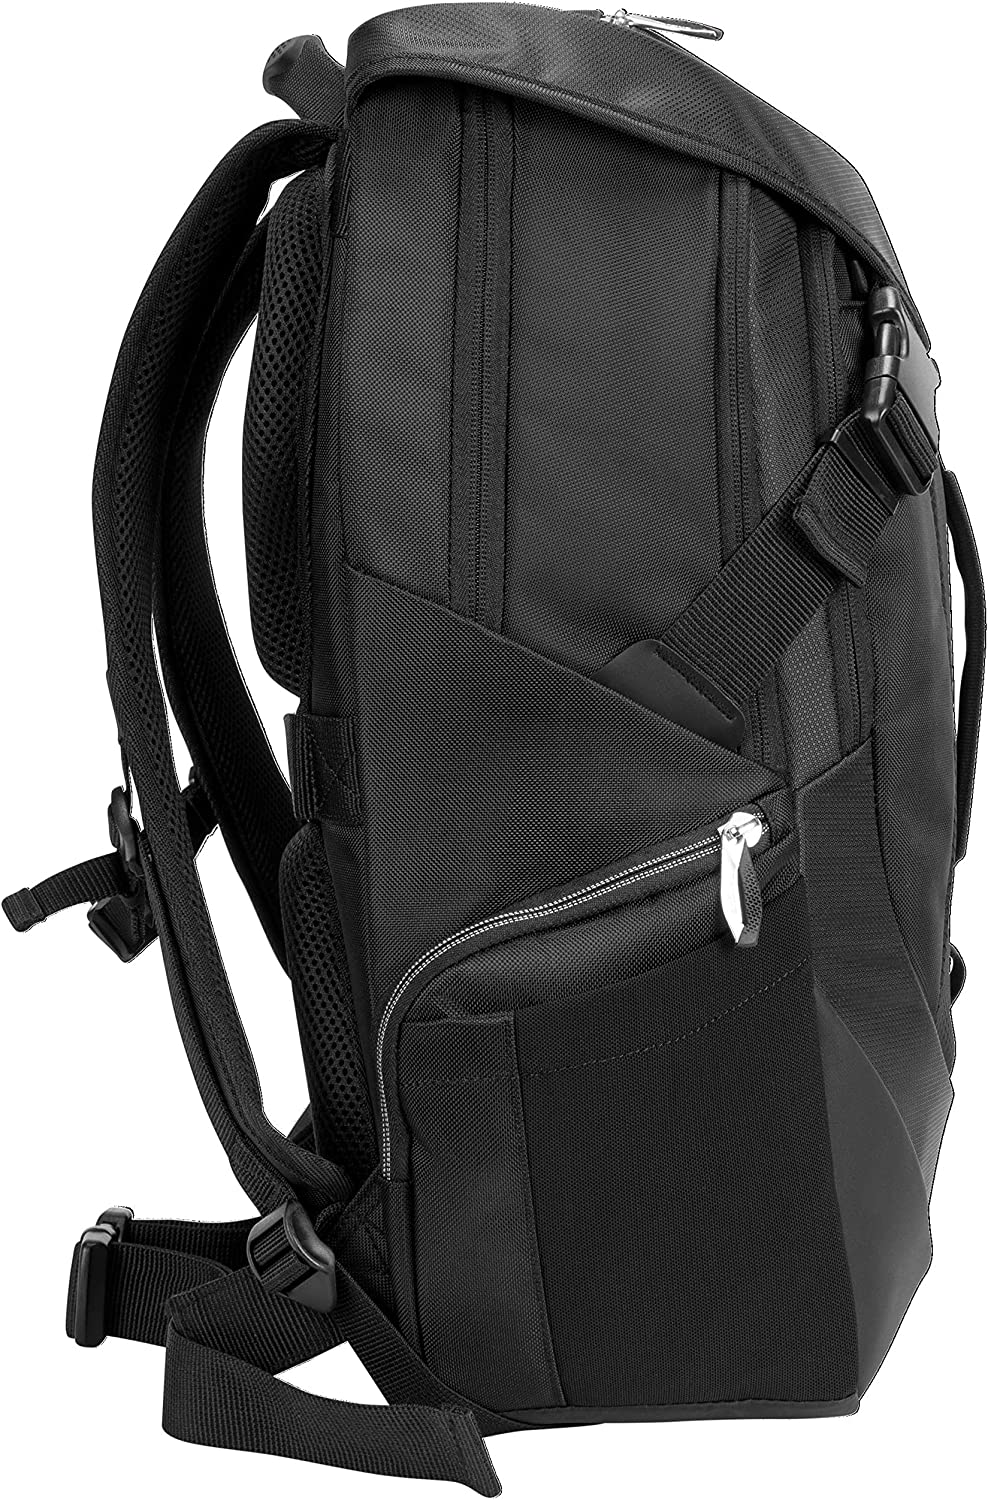 Targus Voyager II Travel and Commuter Business Backpack with Hideaway RainCover, Sternum &amp; Waist Buckled Straps, Trolley Strap, Padded Shock-Absorbing Protection for 17.3-Inch Laptop, Black (TSB953GL) Voyager II Backpack